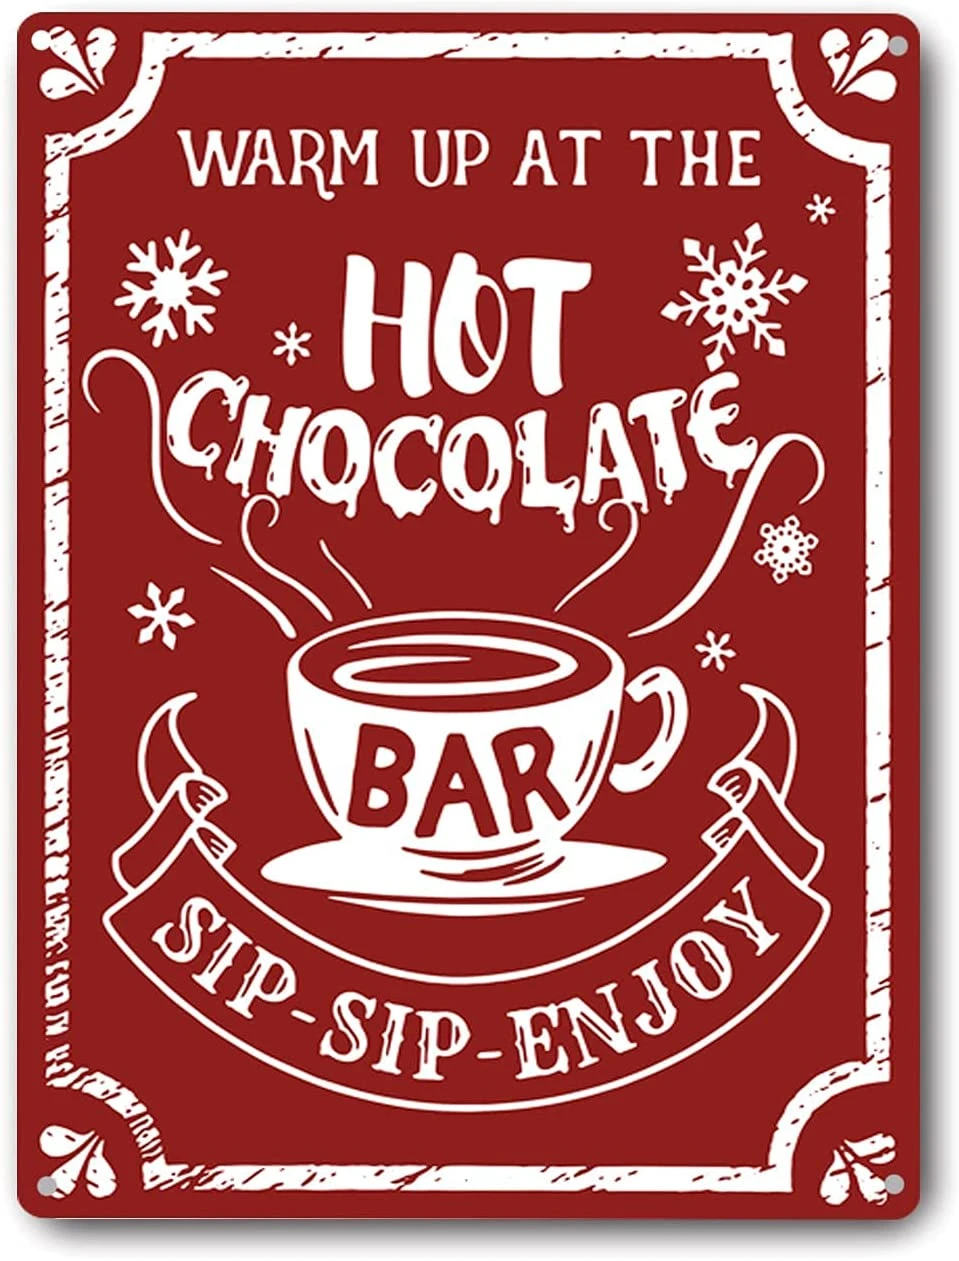 Christmas Metal Tin Sign Hot Chocolate Stick Coffee Cup Christmas Car Decor  Farmhouse Bar Coffee Corner Garage Indoor Outdoor|Plaques & Signs| -  AliExpress